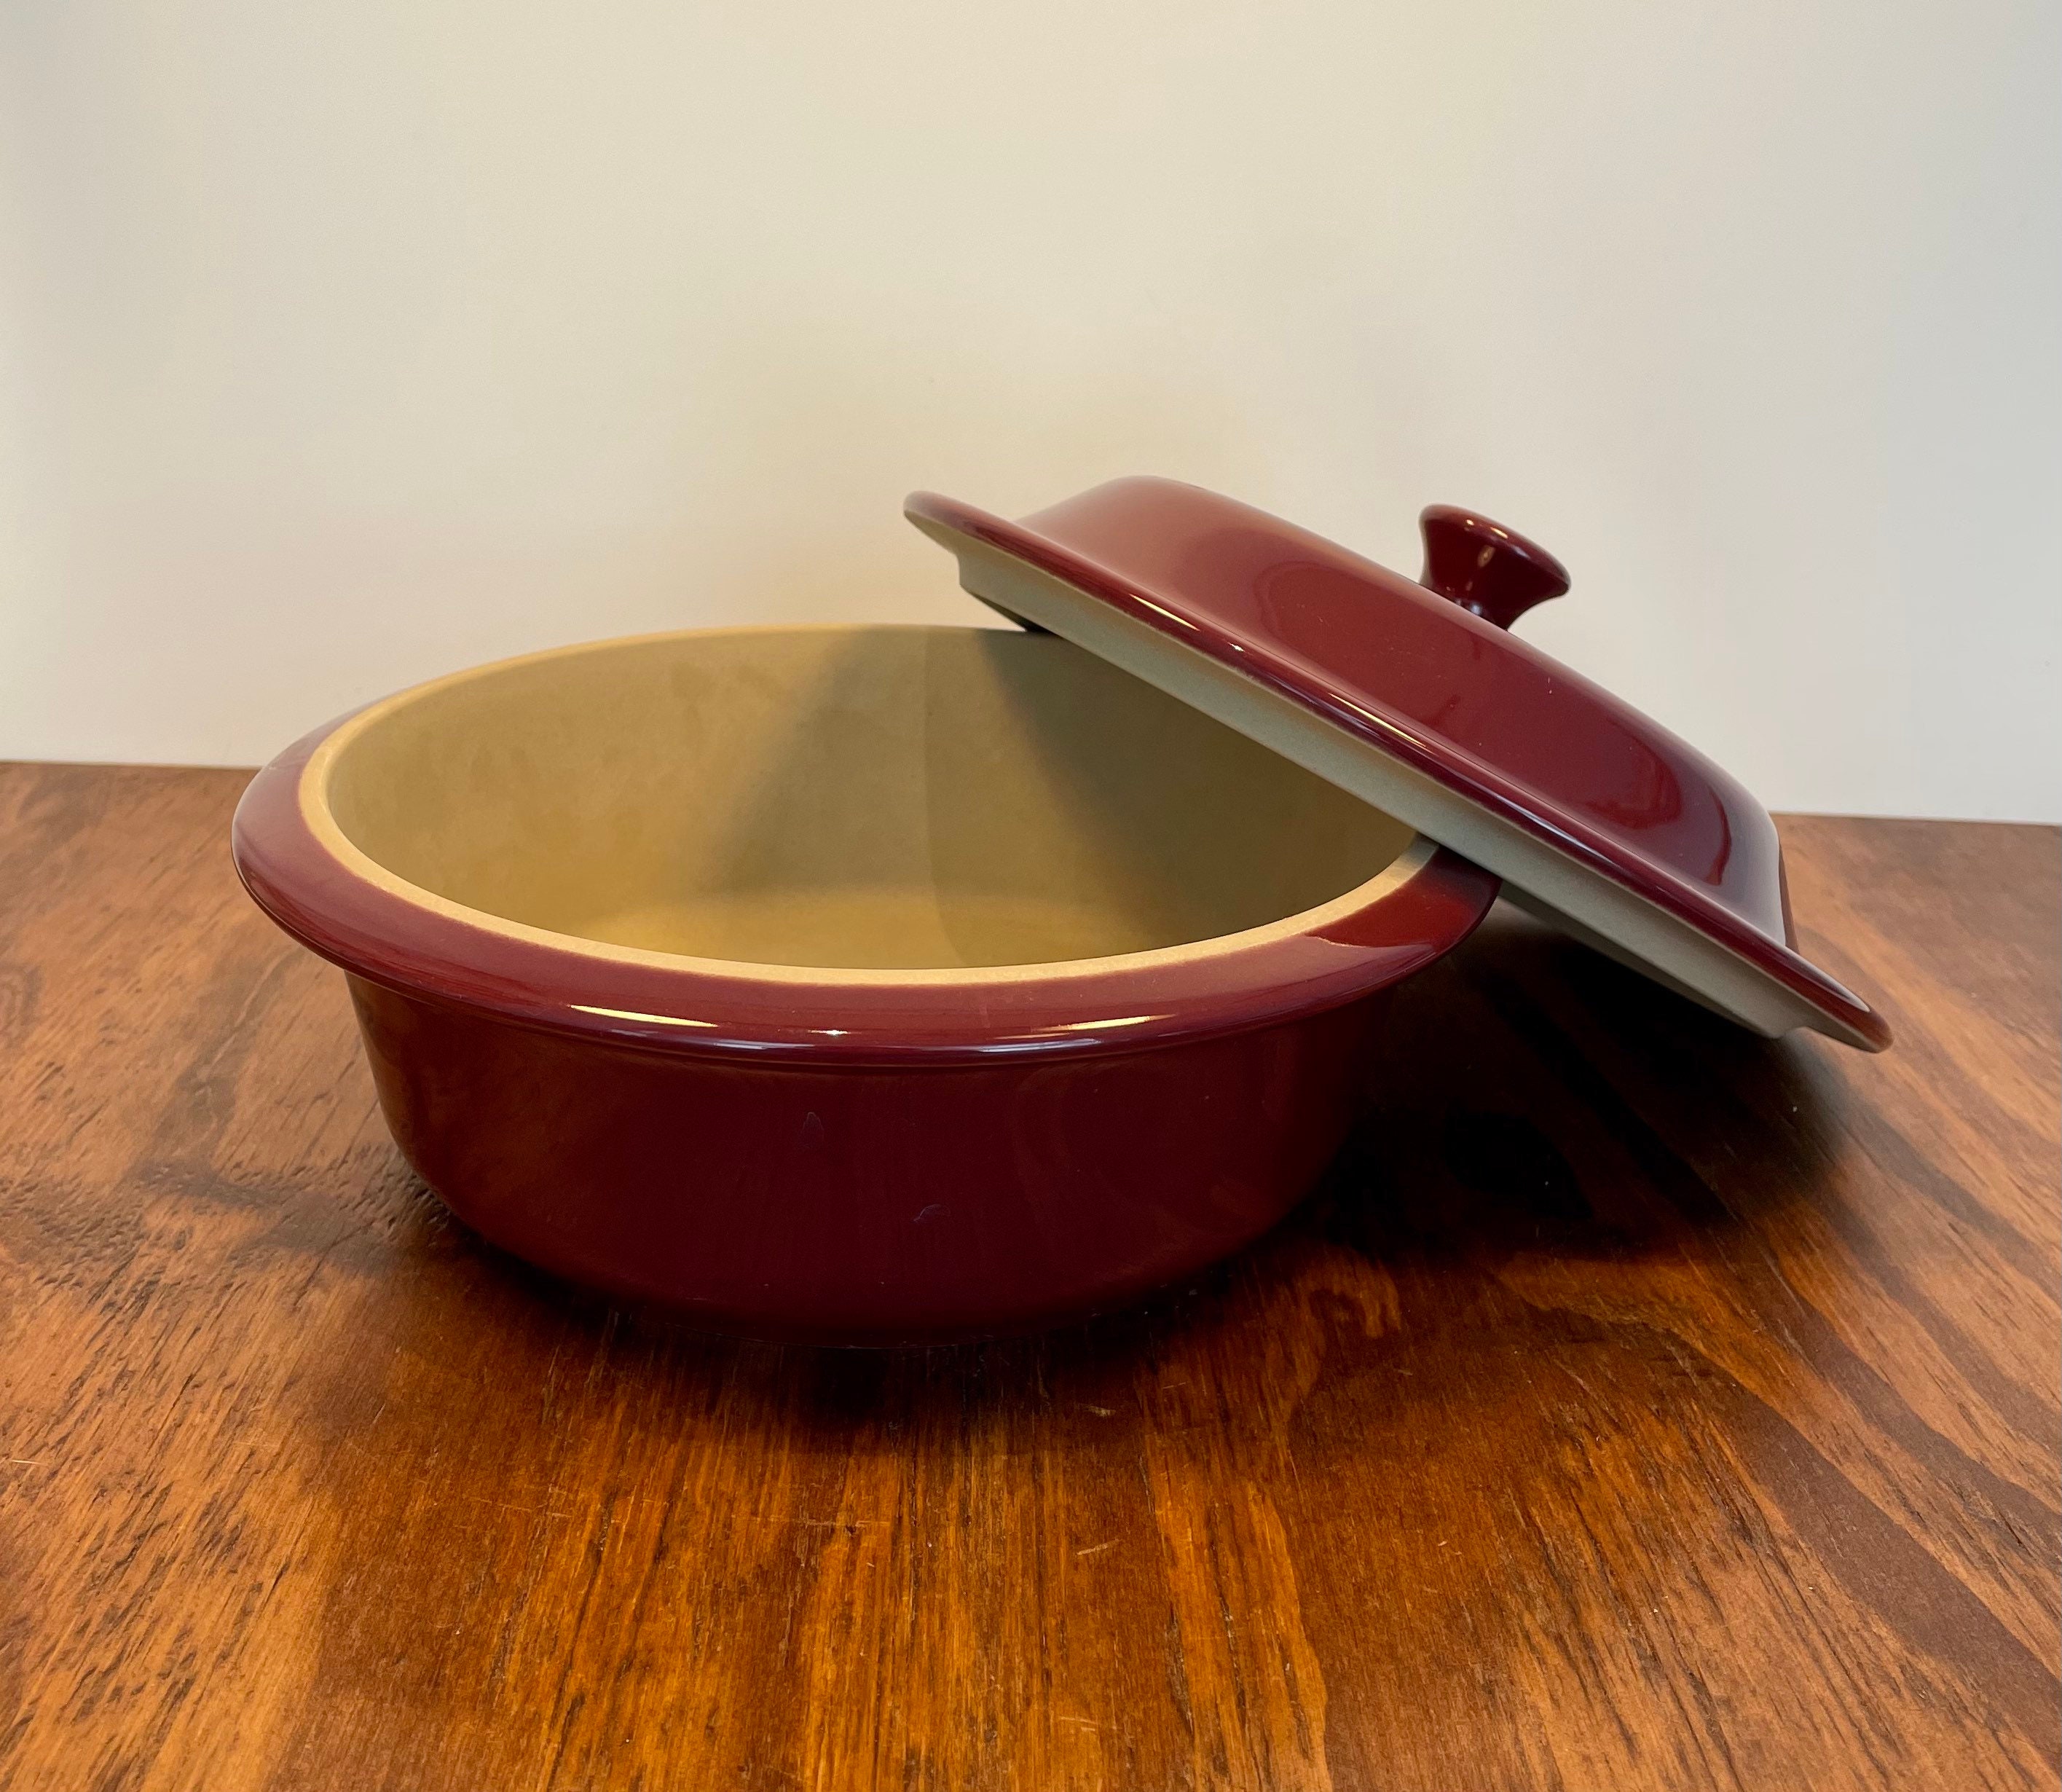  Pampered Chef Cranberry Round Covered Baker Casserole Dish:  Baking Dishes: Home & Kitchen